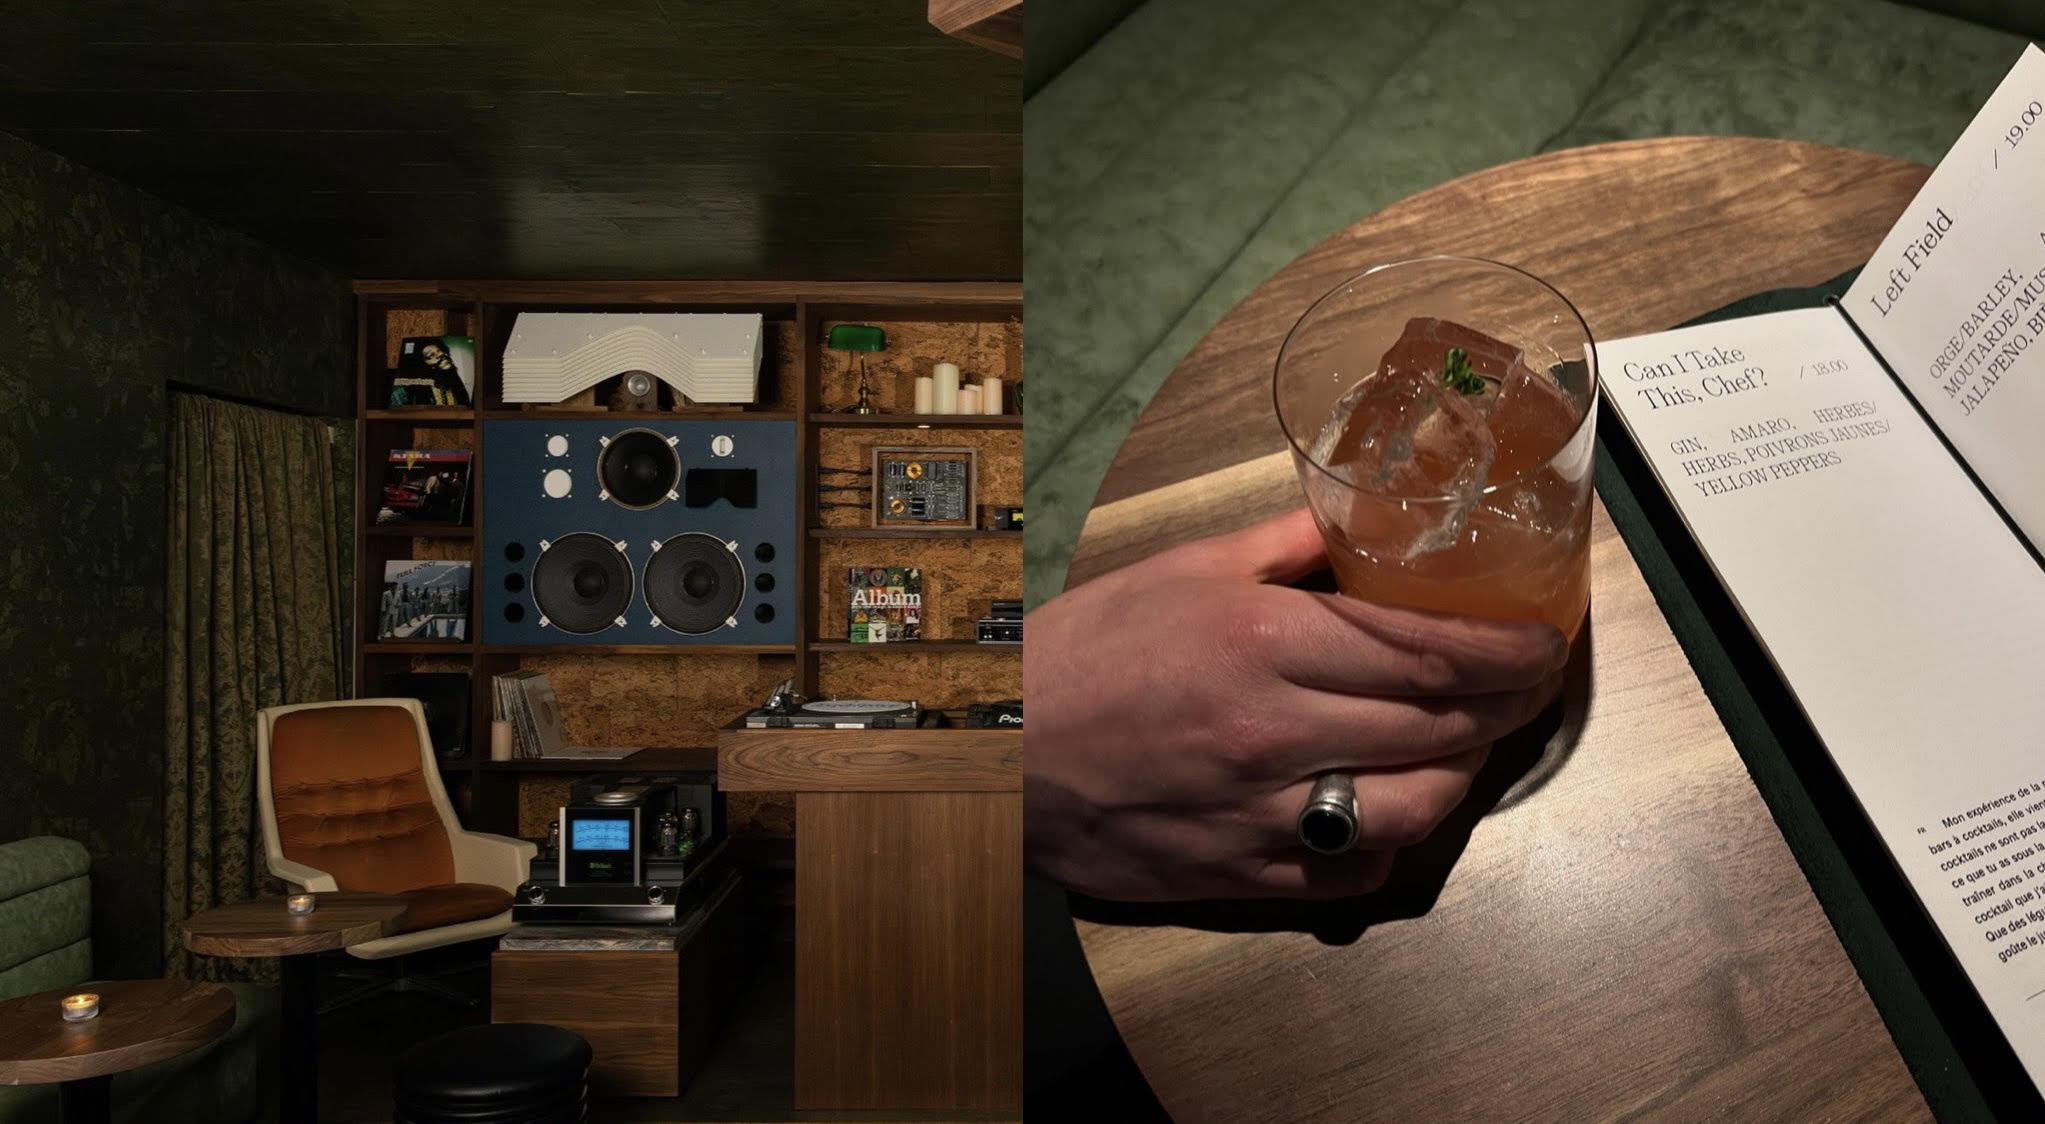 Salon Badin is the basement bar and listening lounge of our dreams